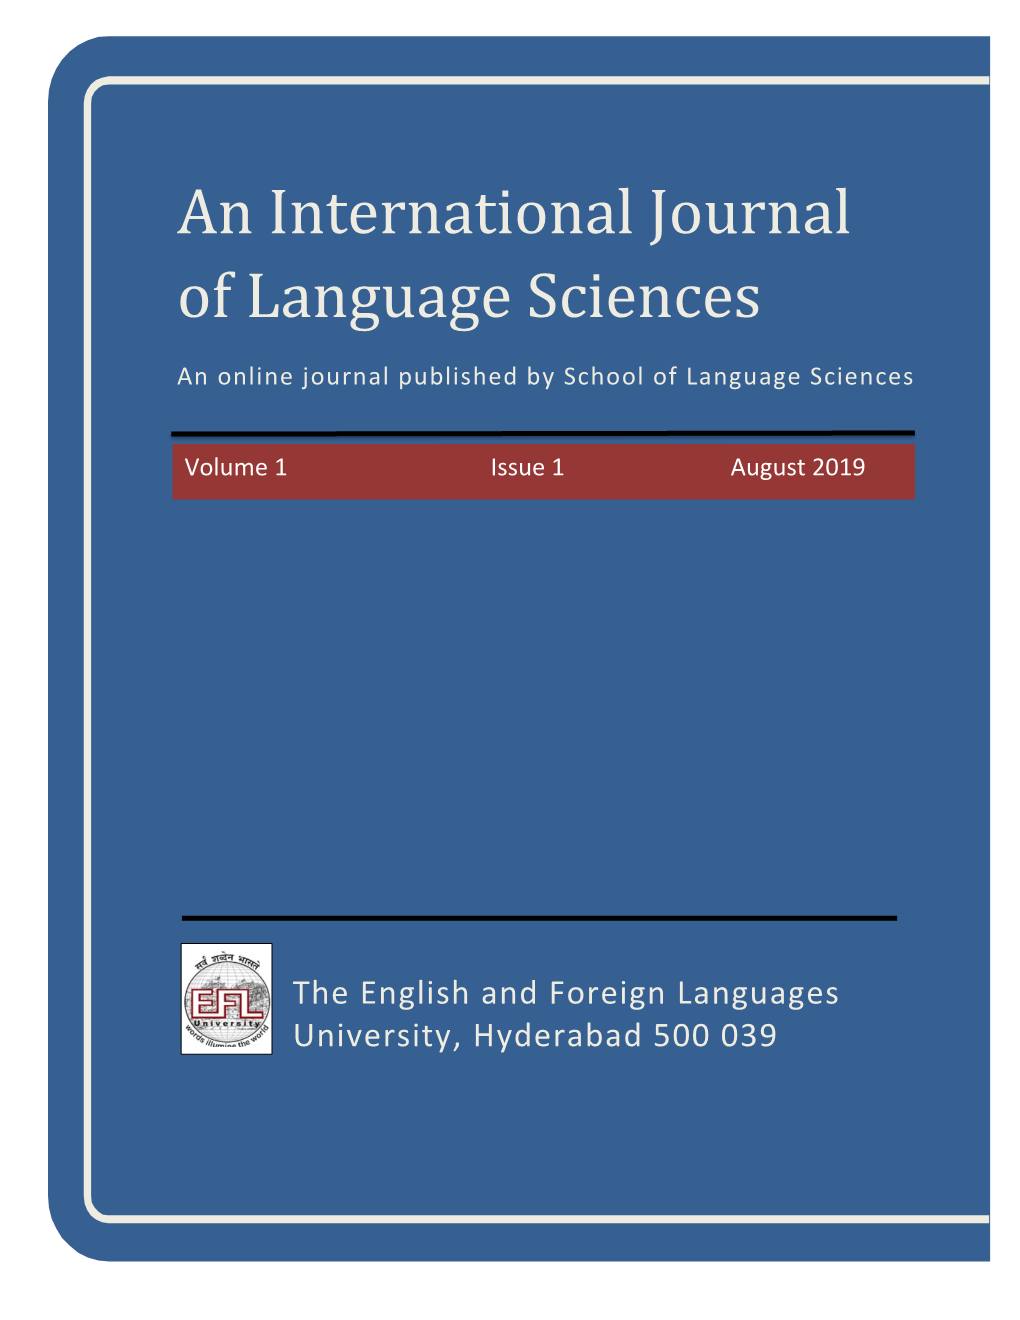 An International Journal of Language Sciences an Online Journal Published by School of Language Sciences, EFL-U Volume 1, Issue 1, August 2019